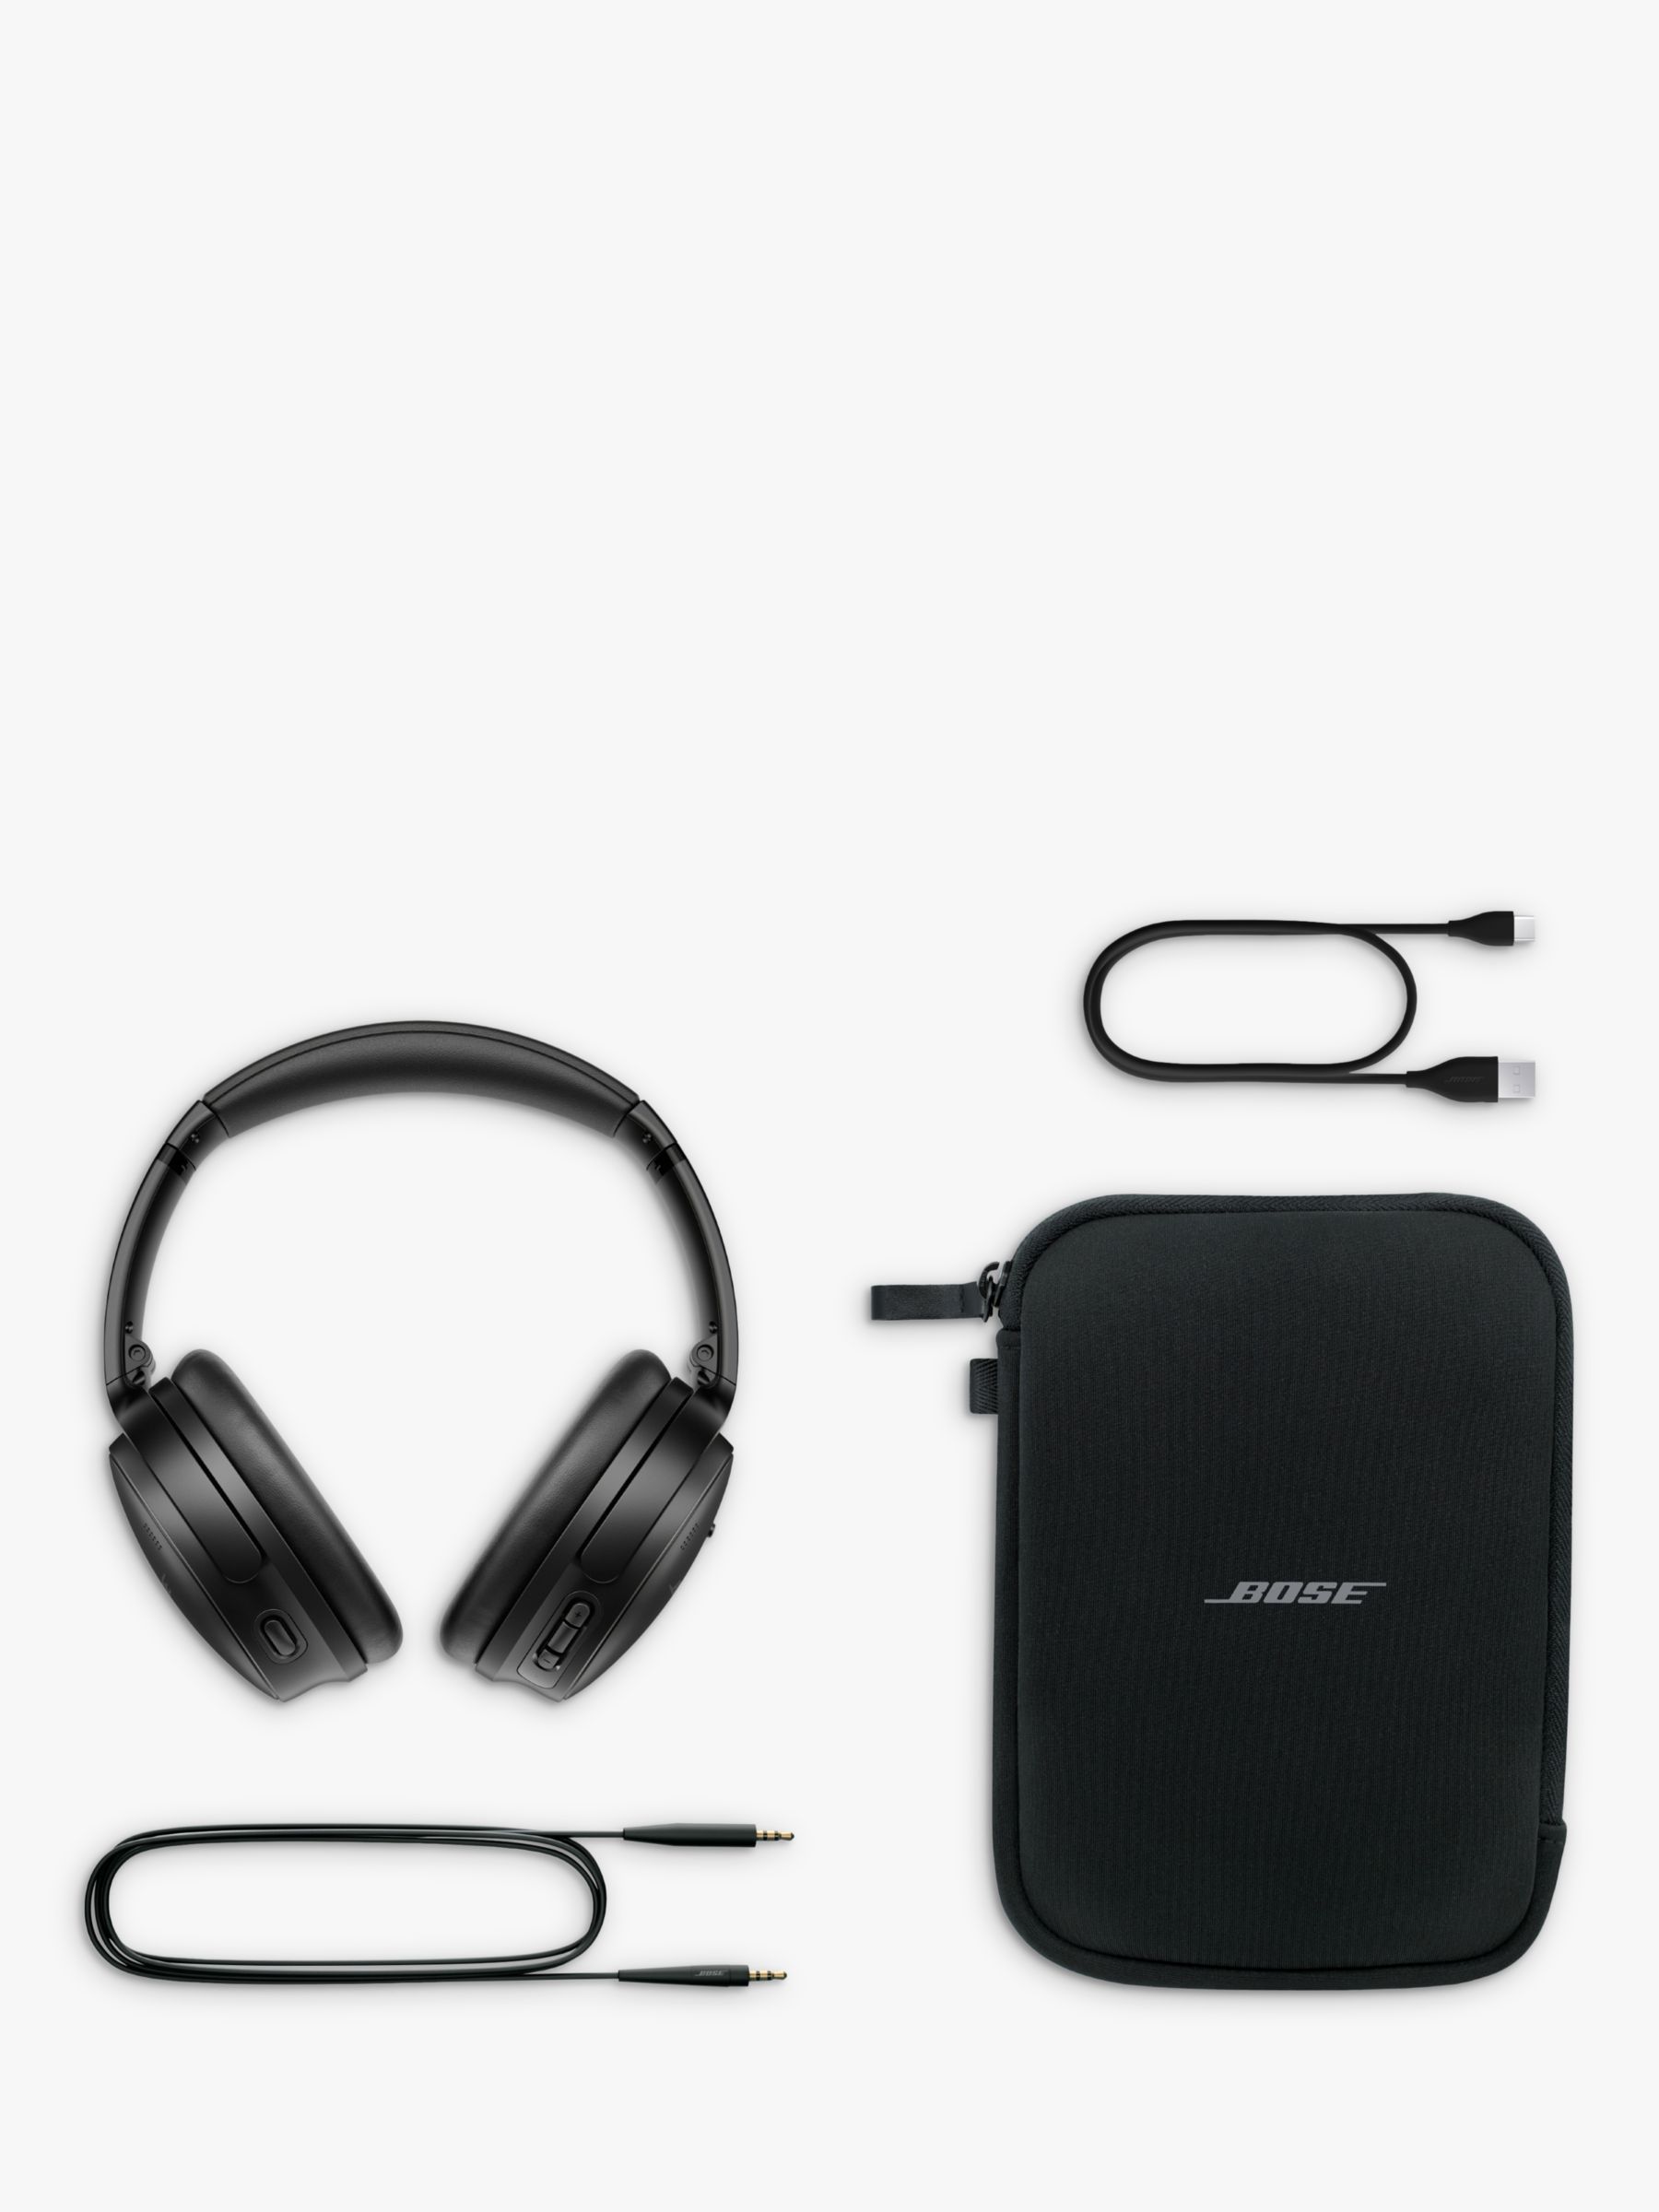 Bose QC45 SE Noise Cancelling Over-Ear Wireless Headphones with Mic/Remote, Black